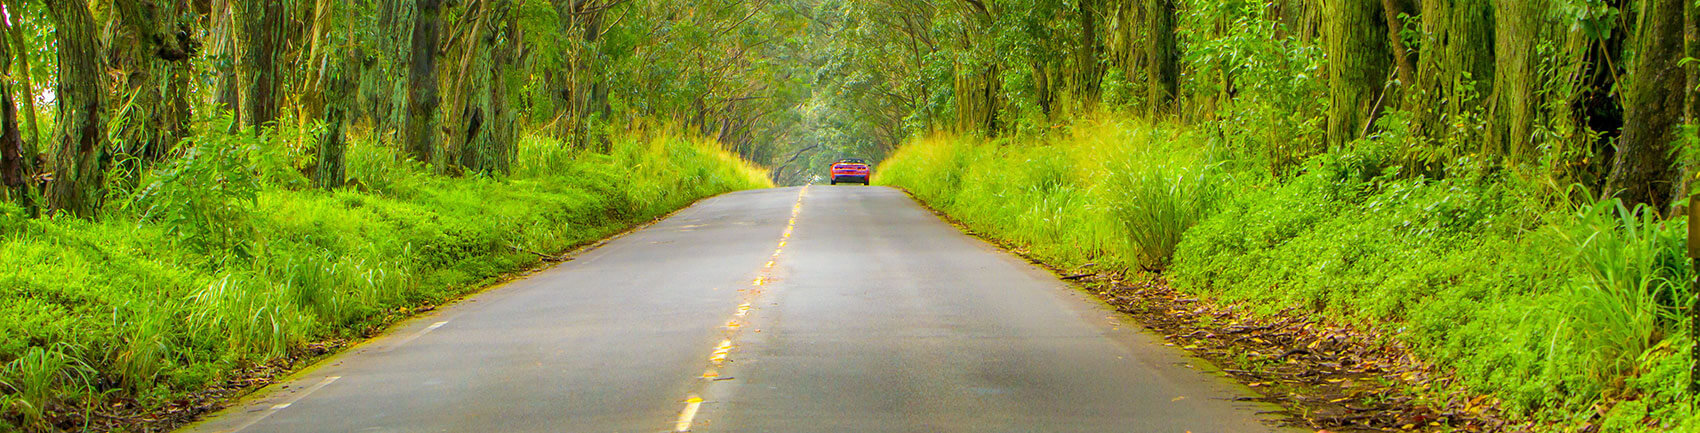 Red car driving away on a two way road with trees over arching and green foliage that line the road way.